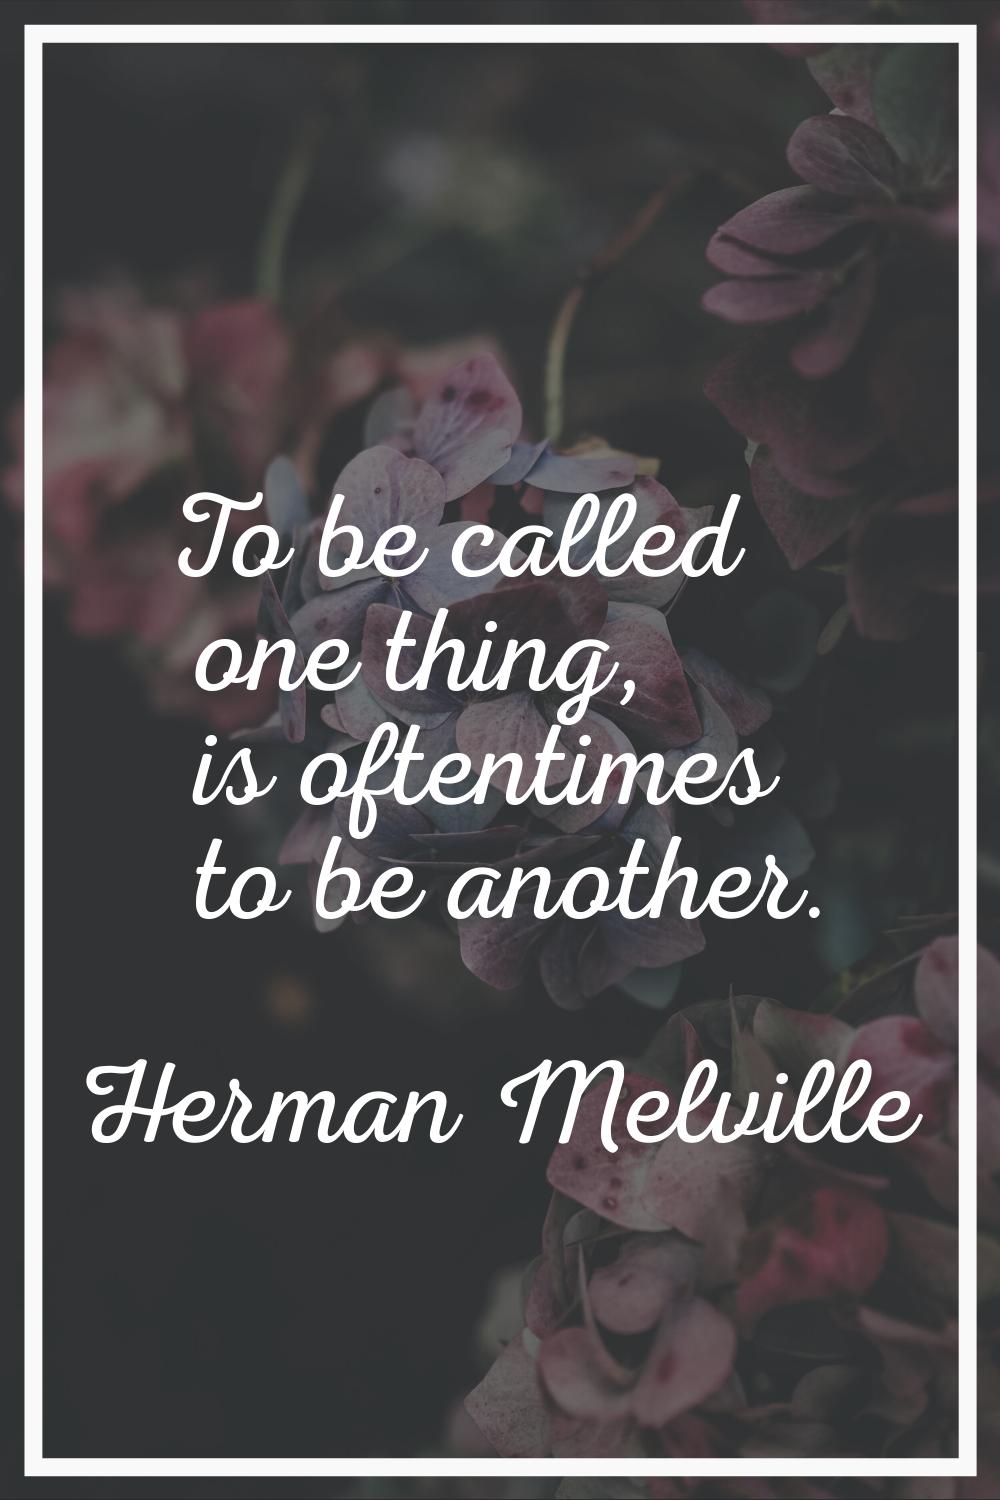 To be called one thing, is oftentimes to be another.